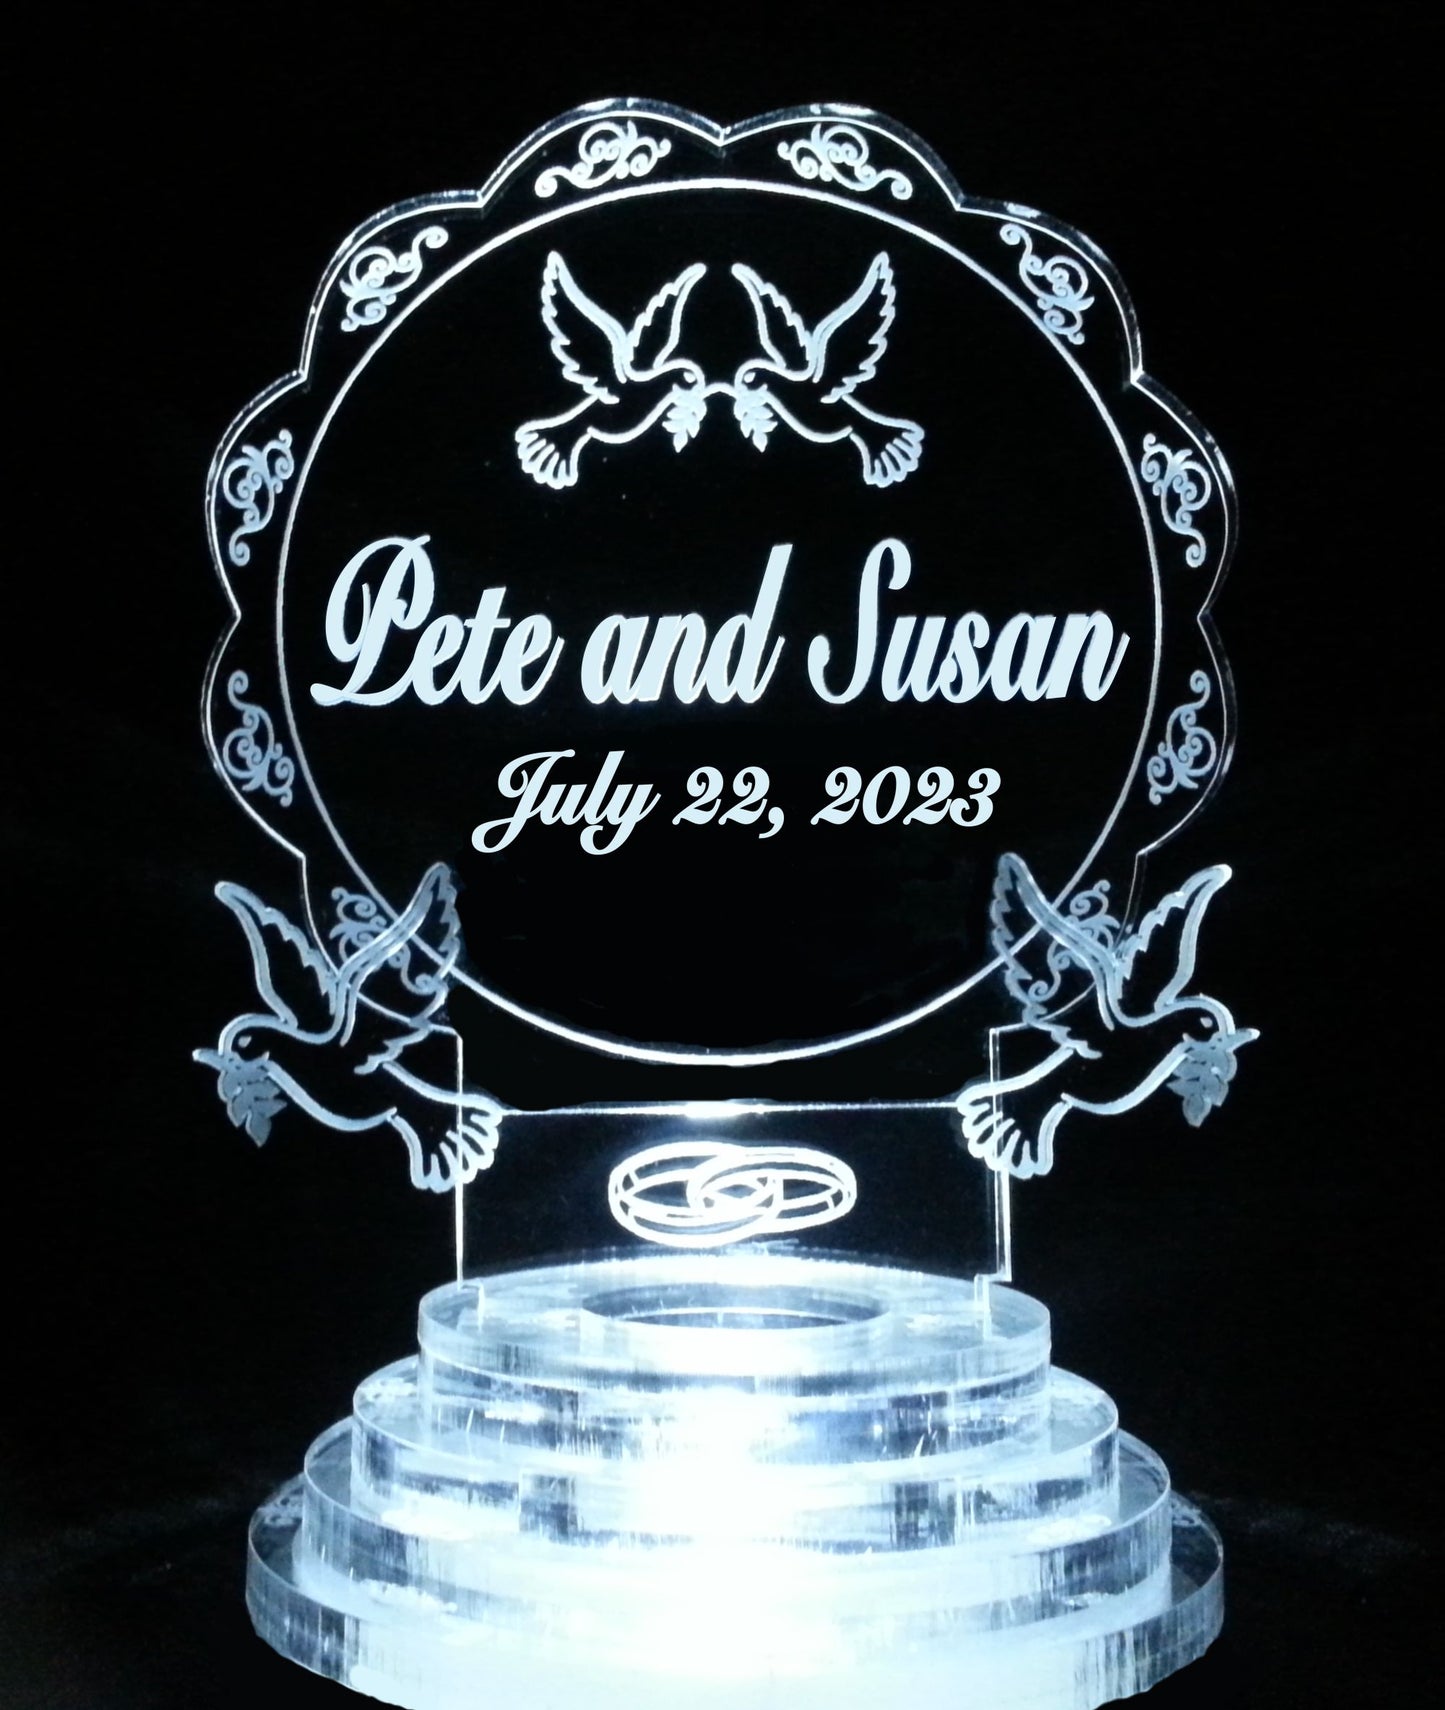 Acrylic lighted cake topper with a dove design and wedding rings, along with names and date